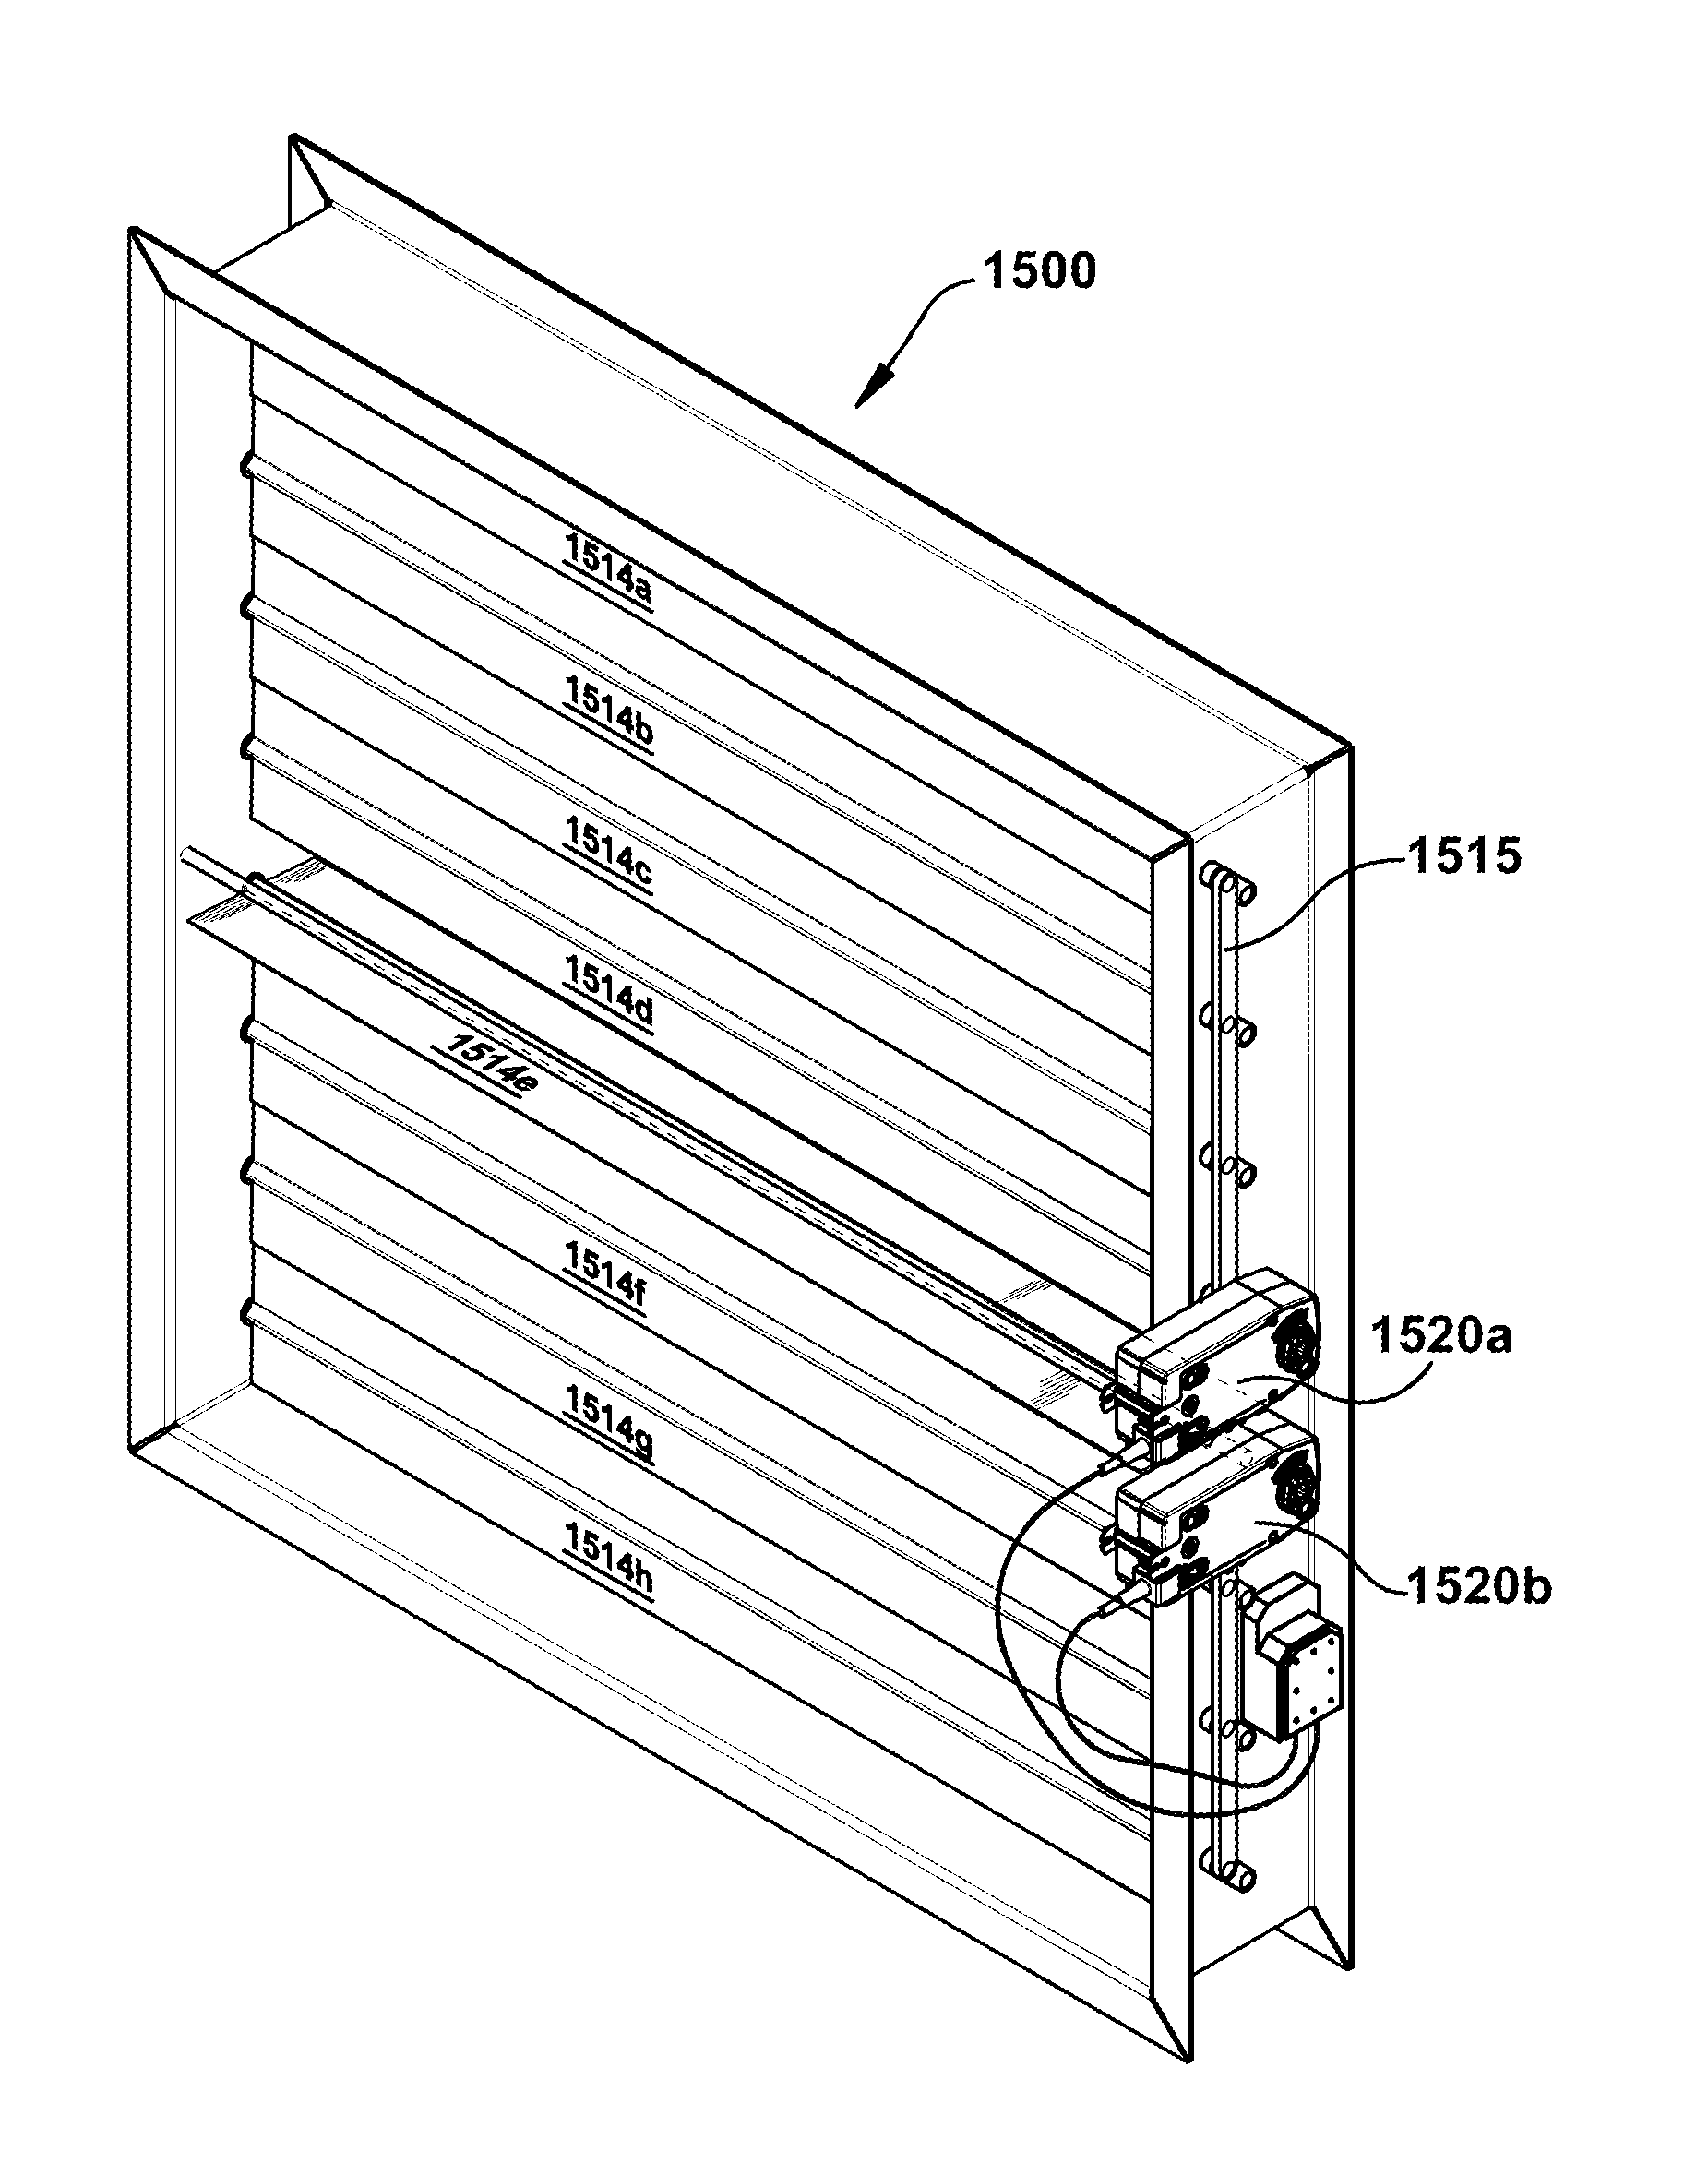 Low flow fluid controller apparatus and system